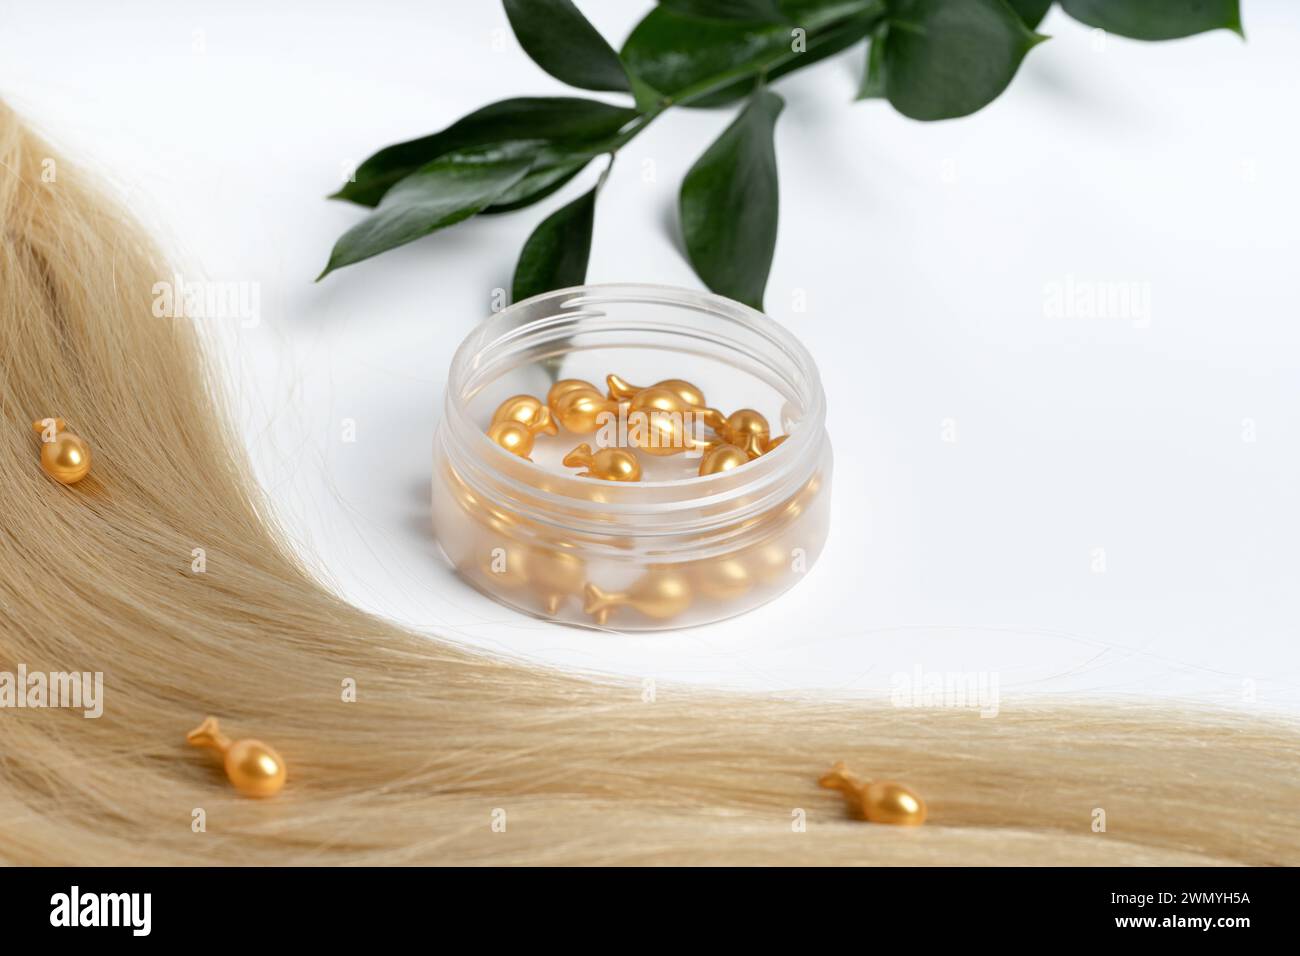 A close-up of golden serum capsules alongside a lock of blonde hair for nourishing hair care. Stock Photo